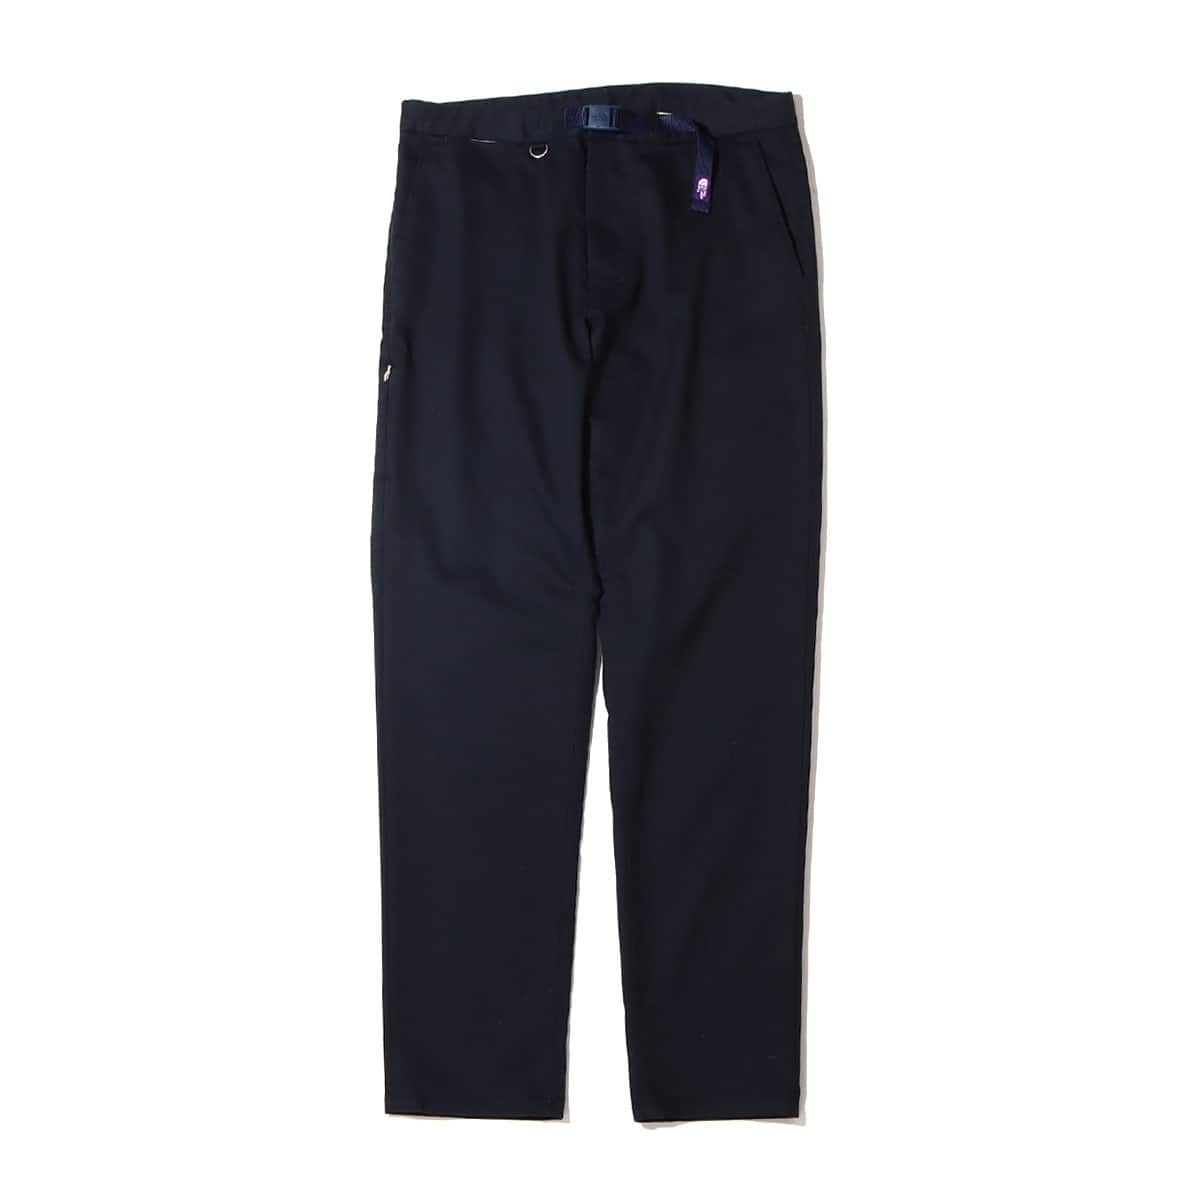 THE NORTH FACE PURPLE LABEL STRETCH TWILL TAPERED PANTS DARK NAVY 